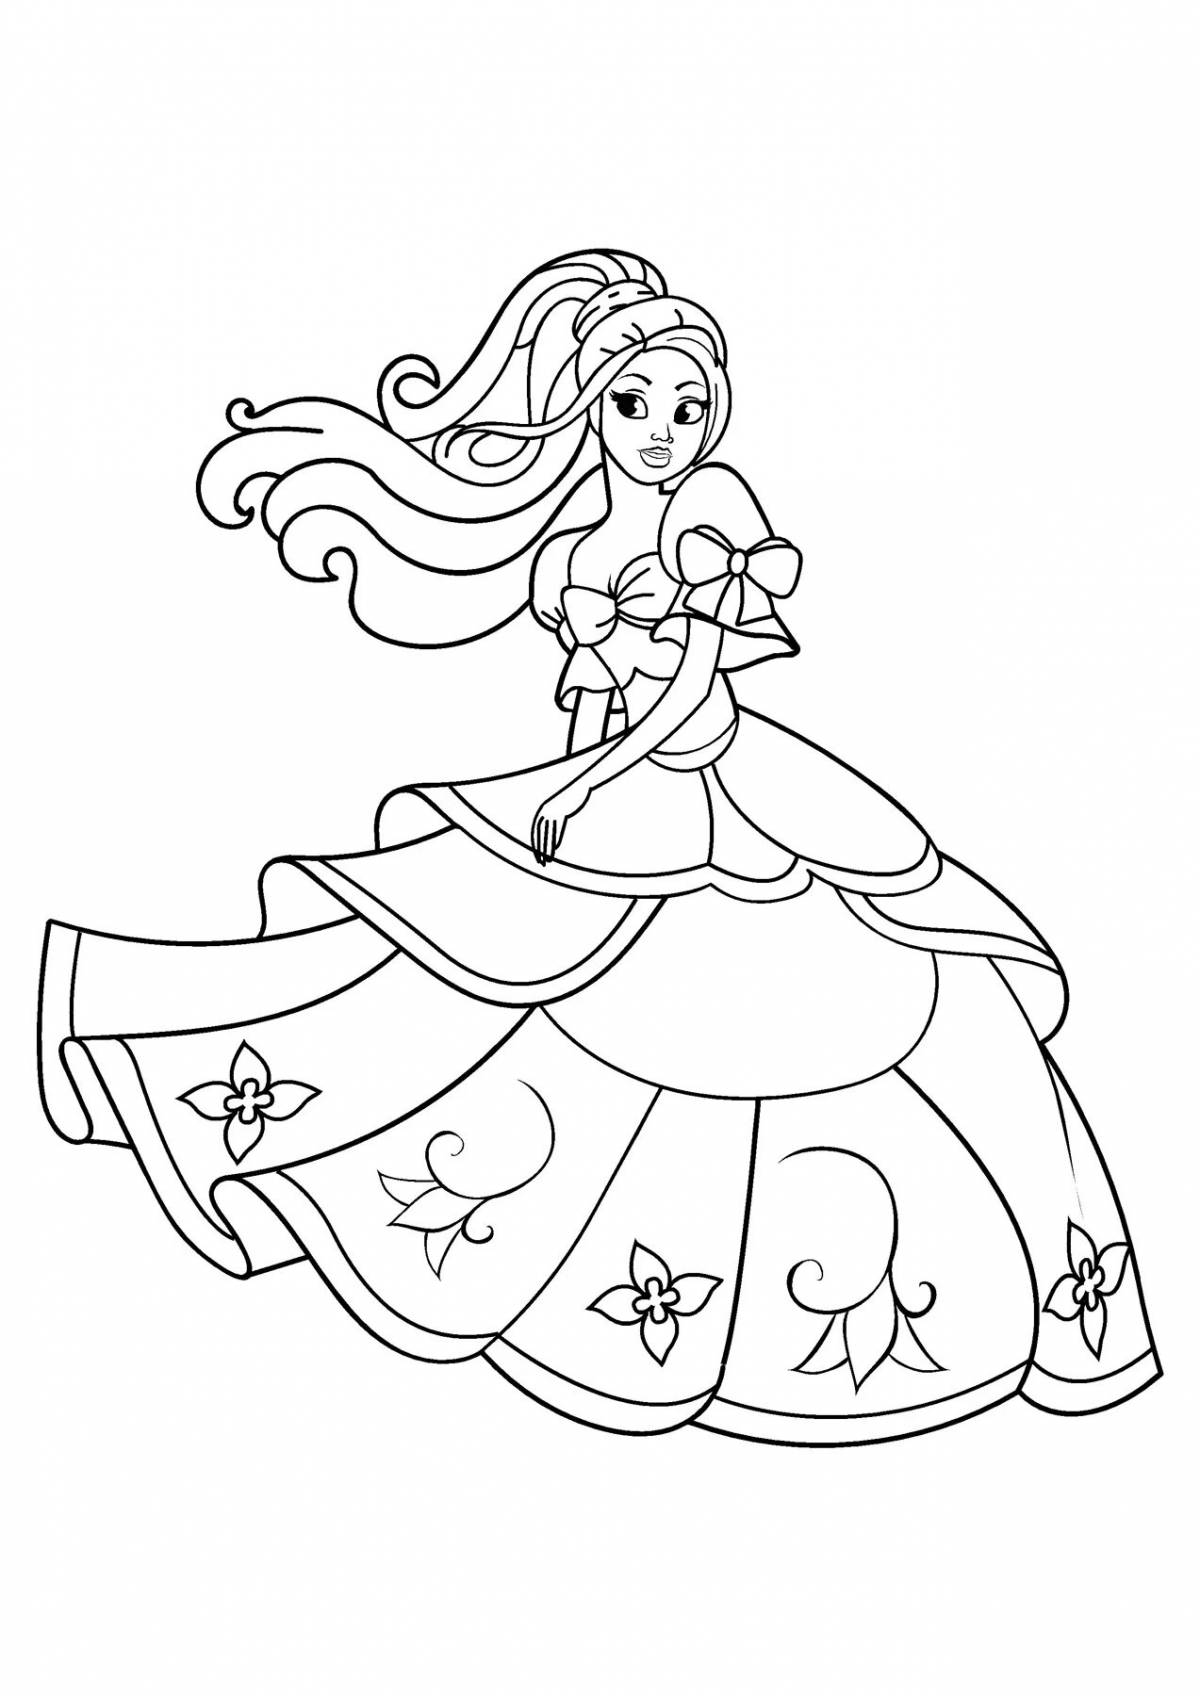 Wonderful coloring pages princesses 4-5 years old